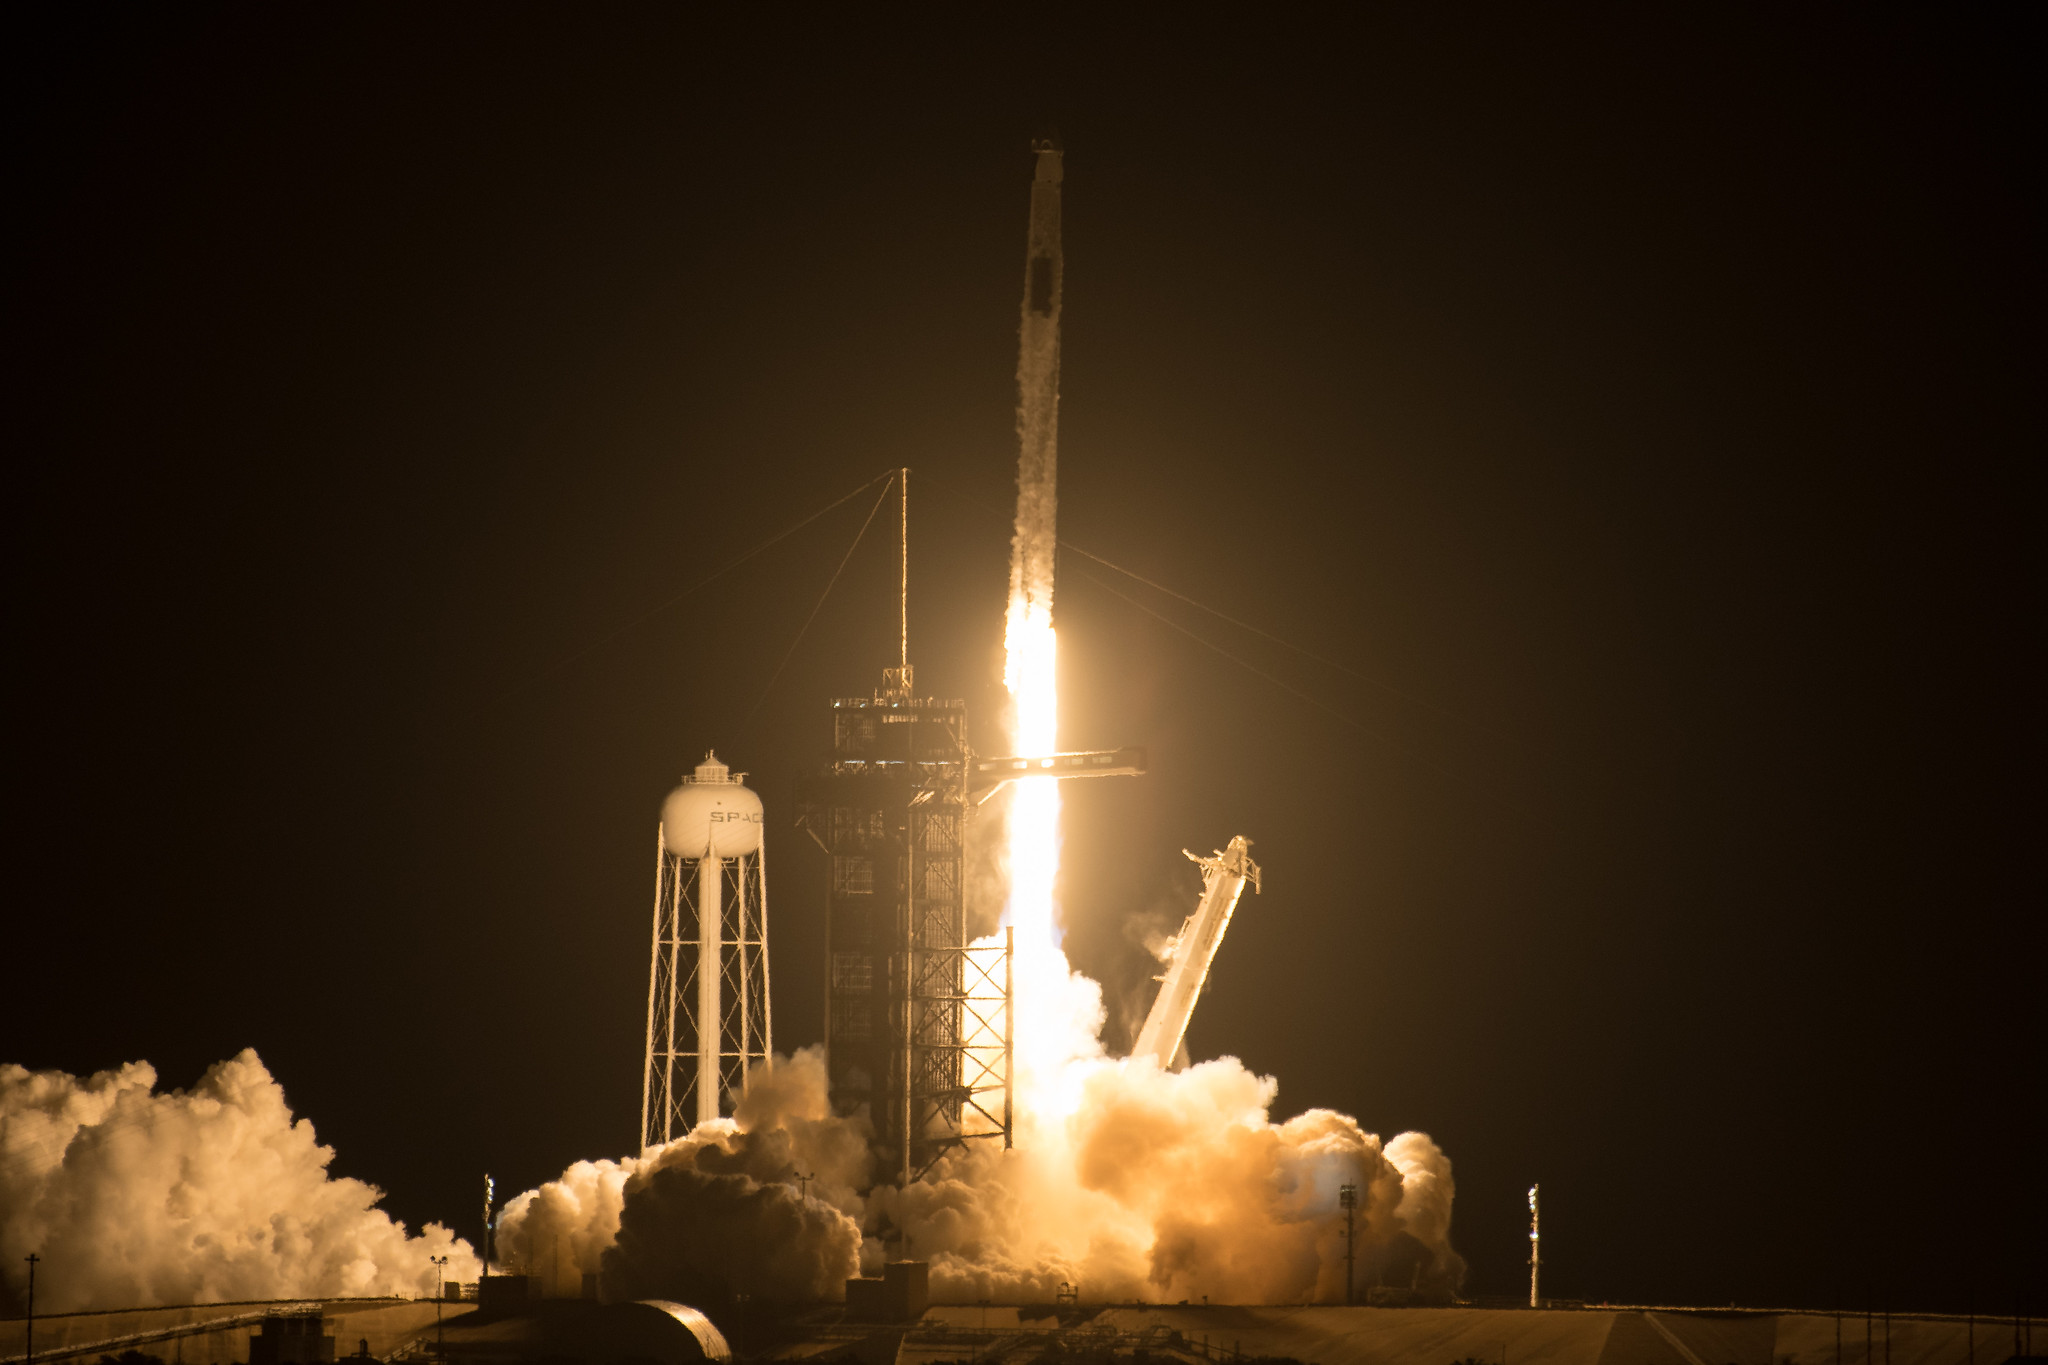 NASA's SpaceX Crew-2 astronauts launched to the International Space Station at 5:49 am Friday, April 23 from NASA's Kennedy Space Center.